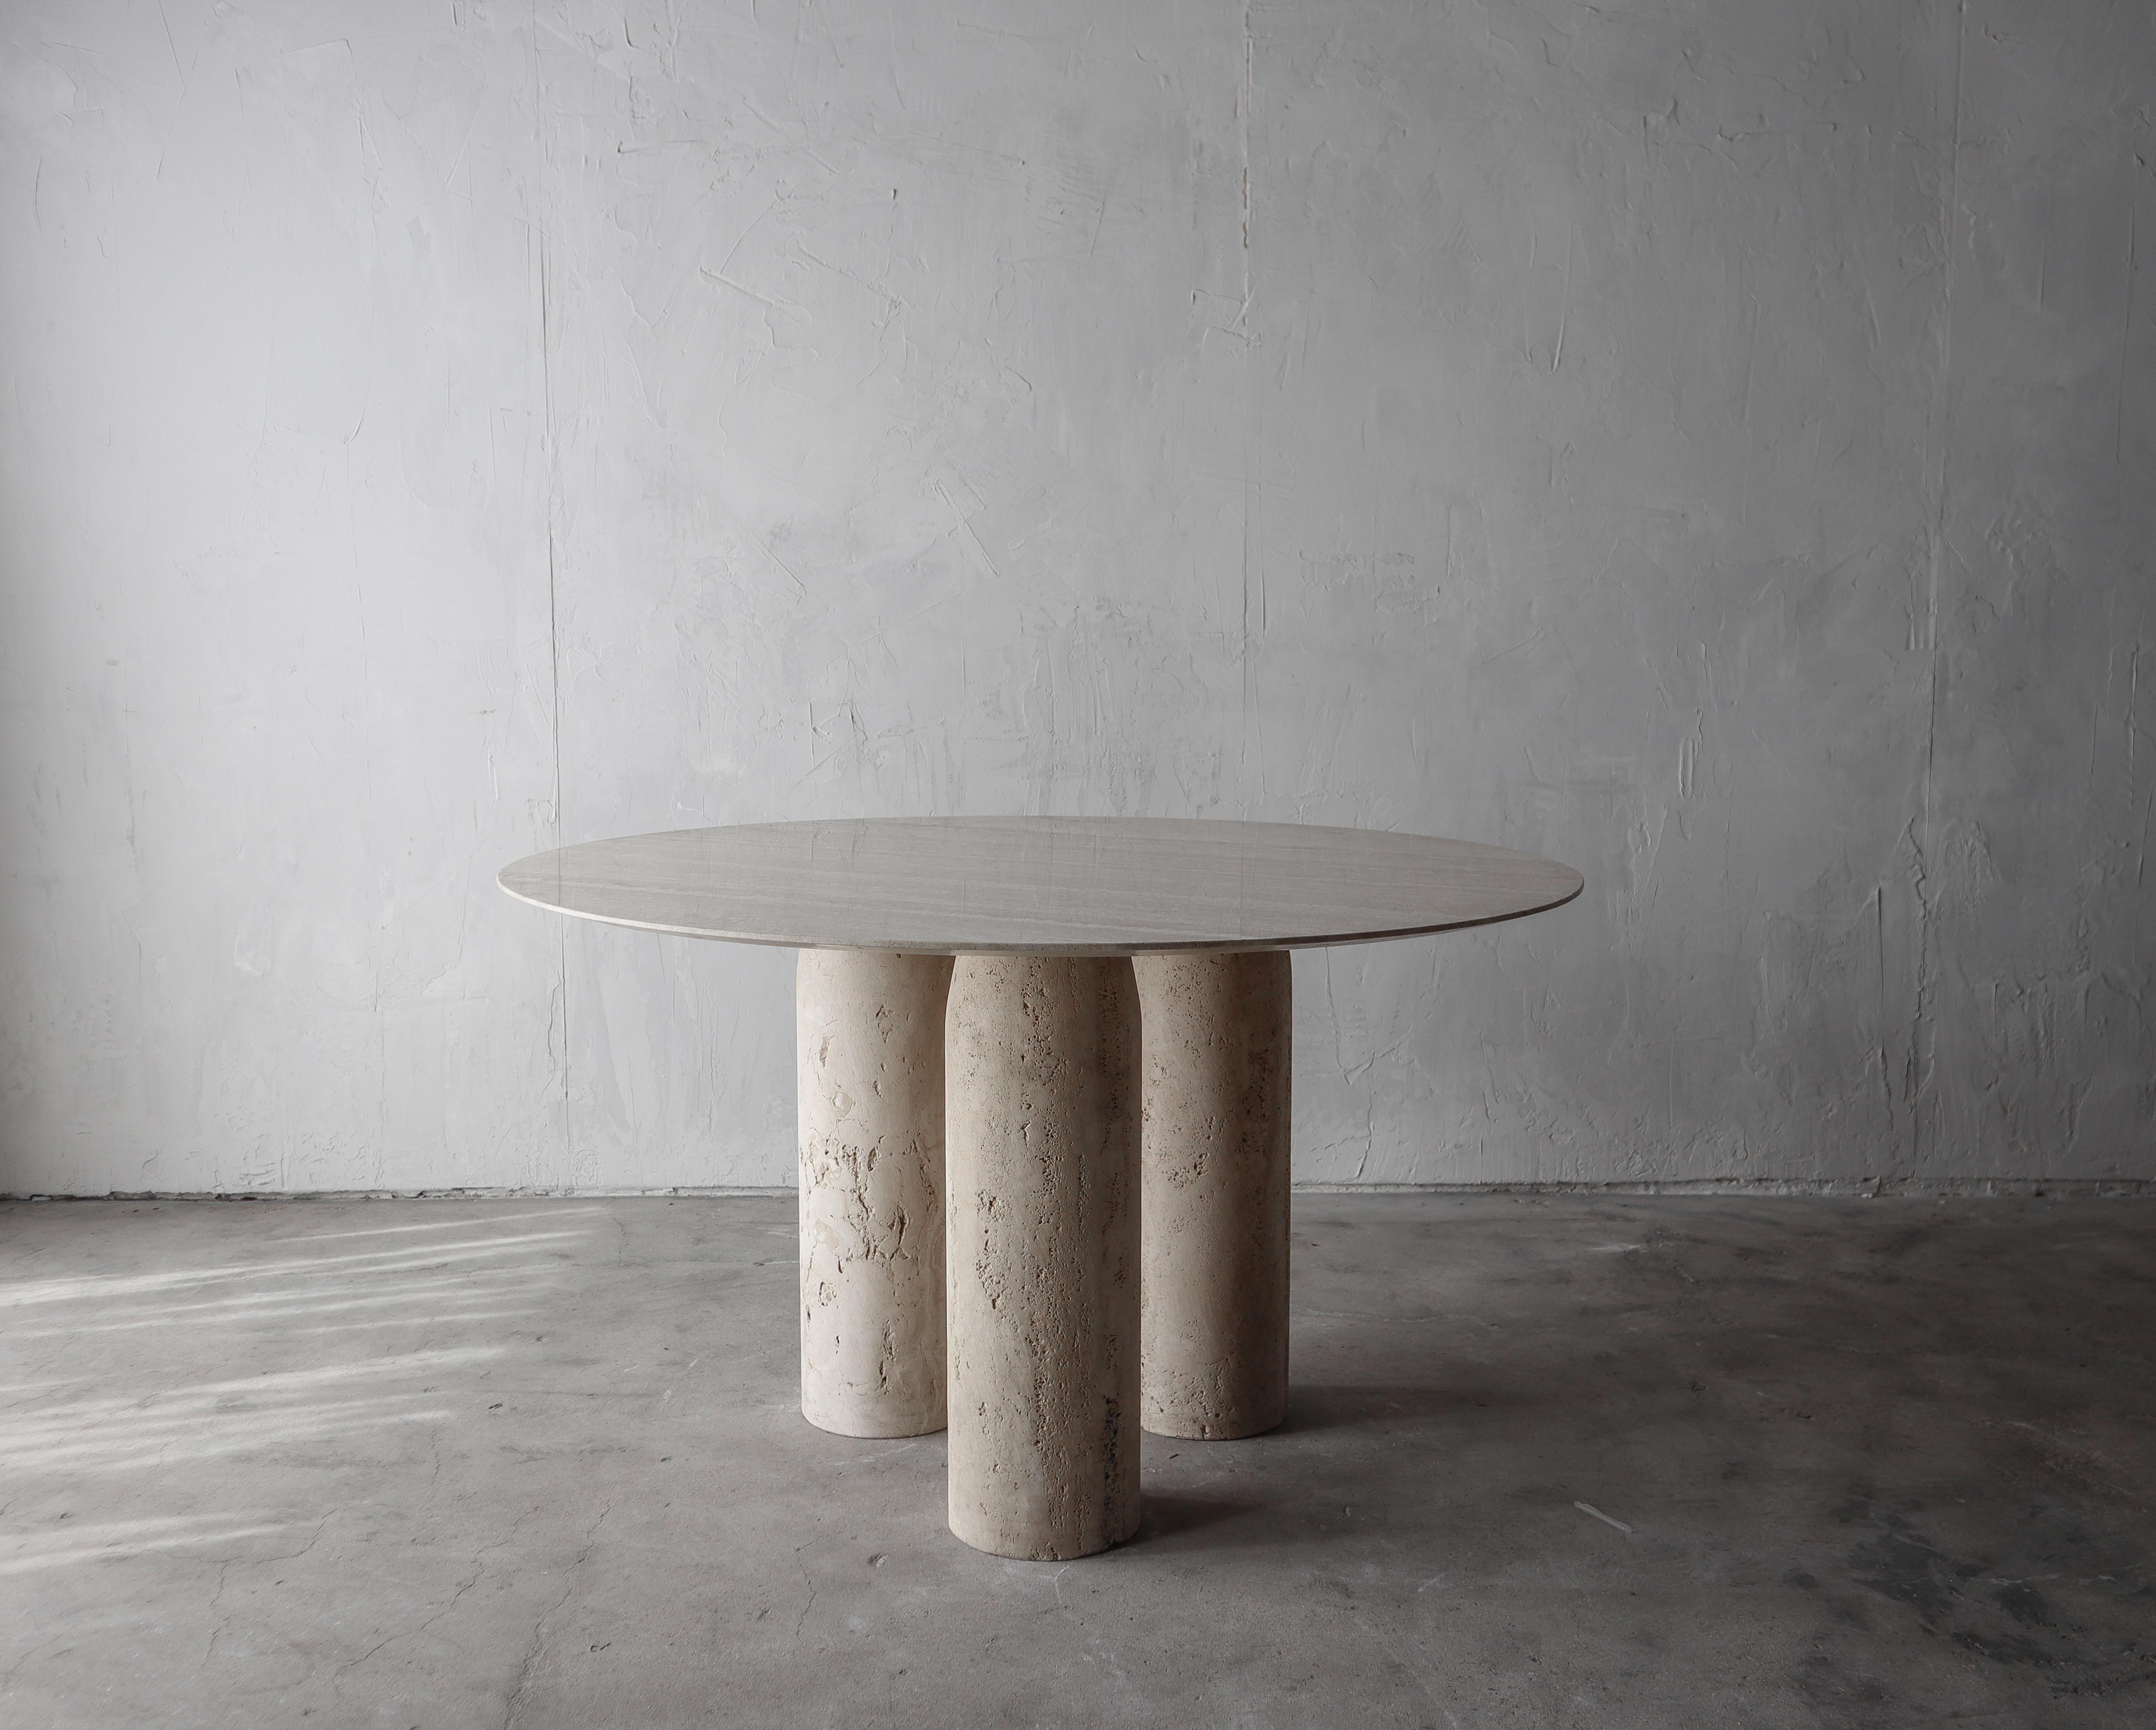 II Colonnato dining table by Mario Bellini in gorgeous Italian Travertine, this is an authentic vintage Bellini piece, not a reproduction. These gorgeous tables are highly coveted for their substantial yet minimalistic design. This table is